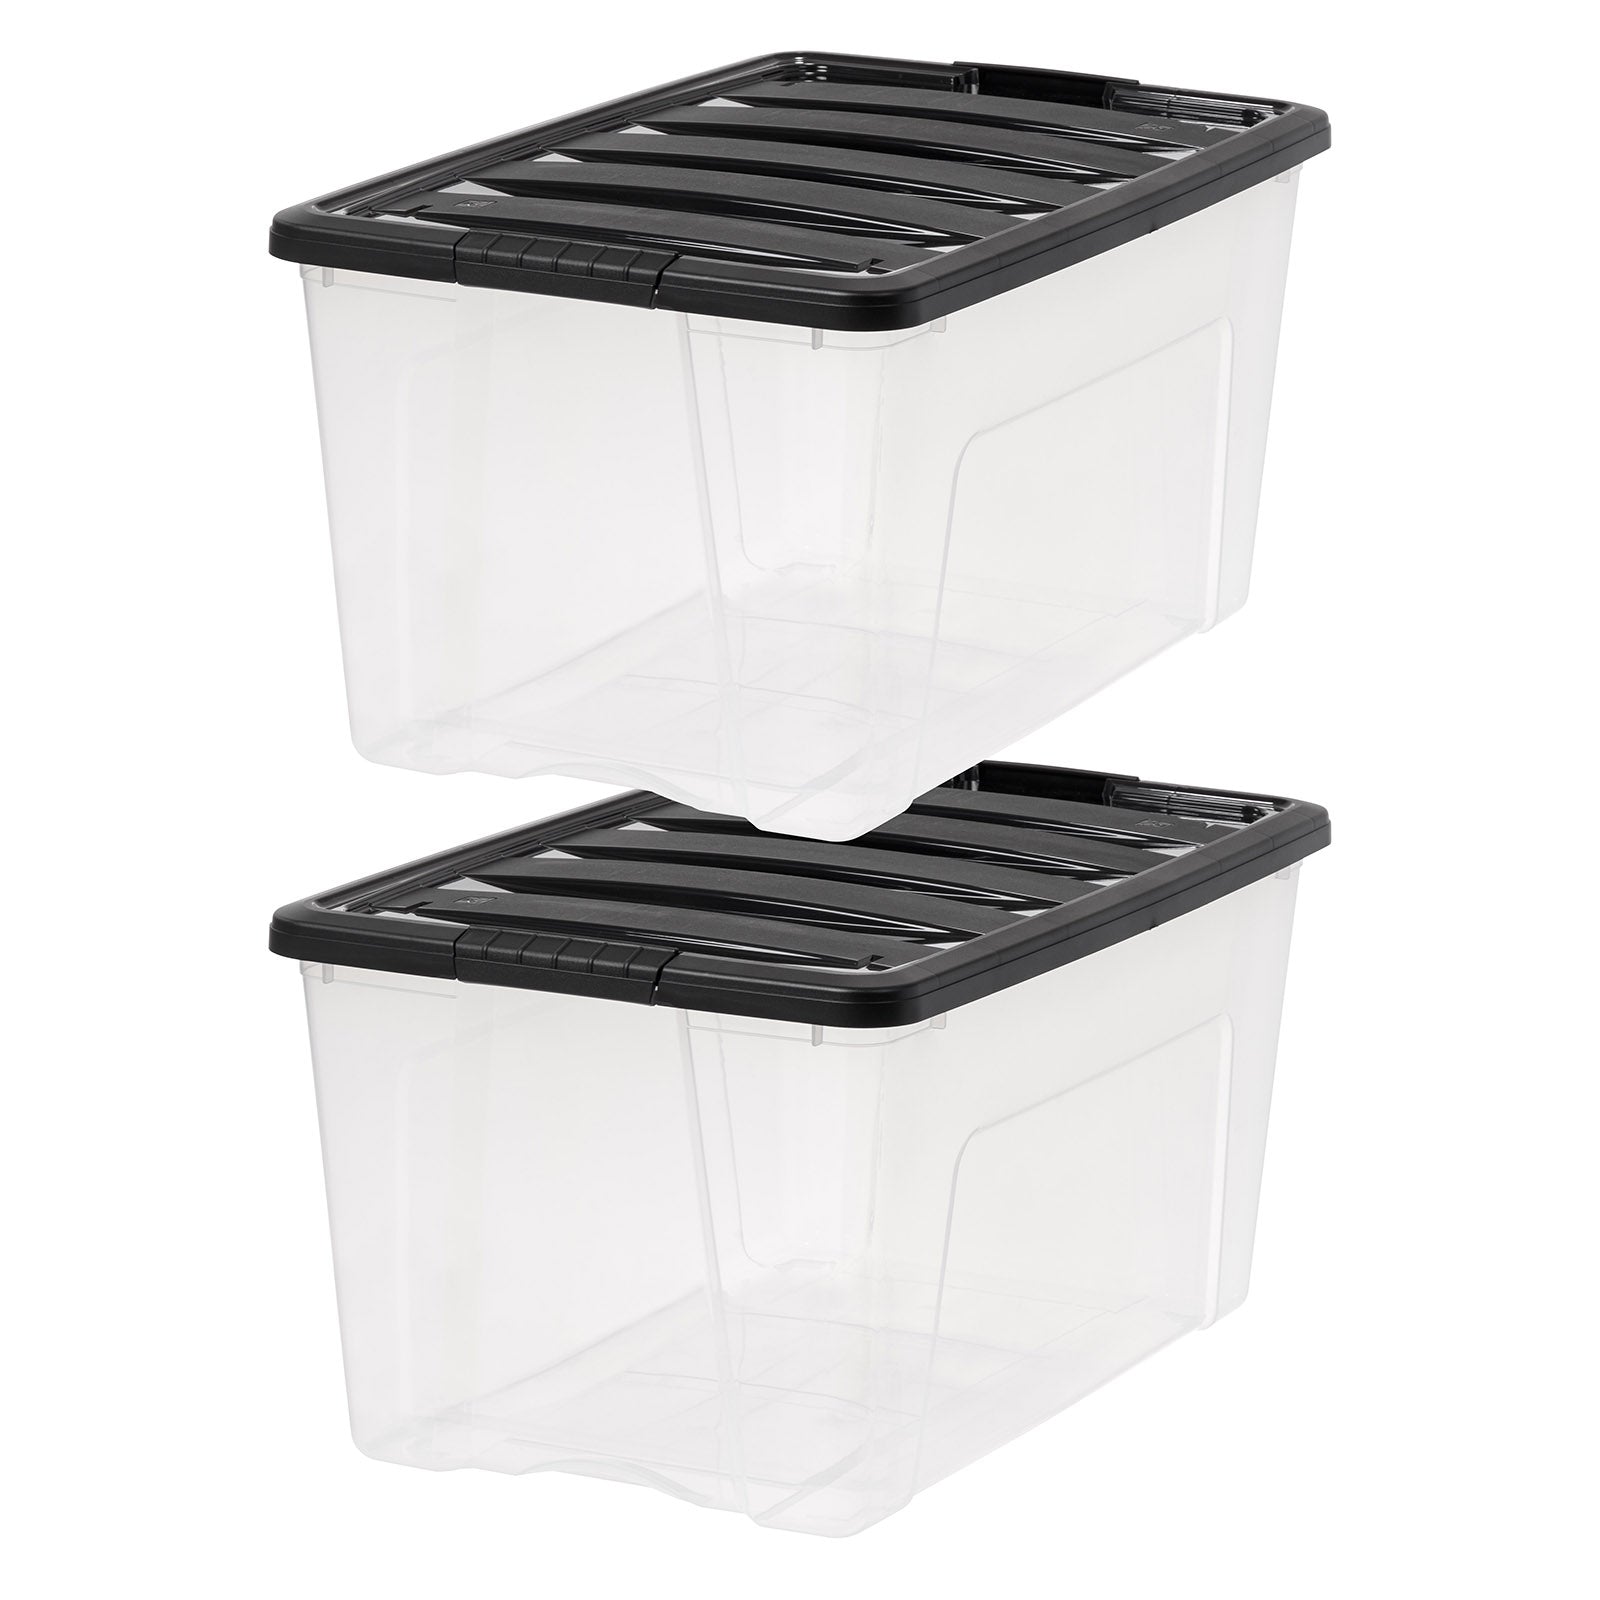 Iris USA 2 Pack 72qt Clear View Plastic Storage Bin with Lid and Secure Latching Buckles, Clear & Black